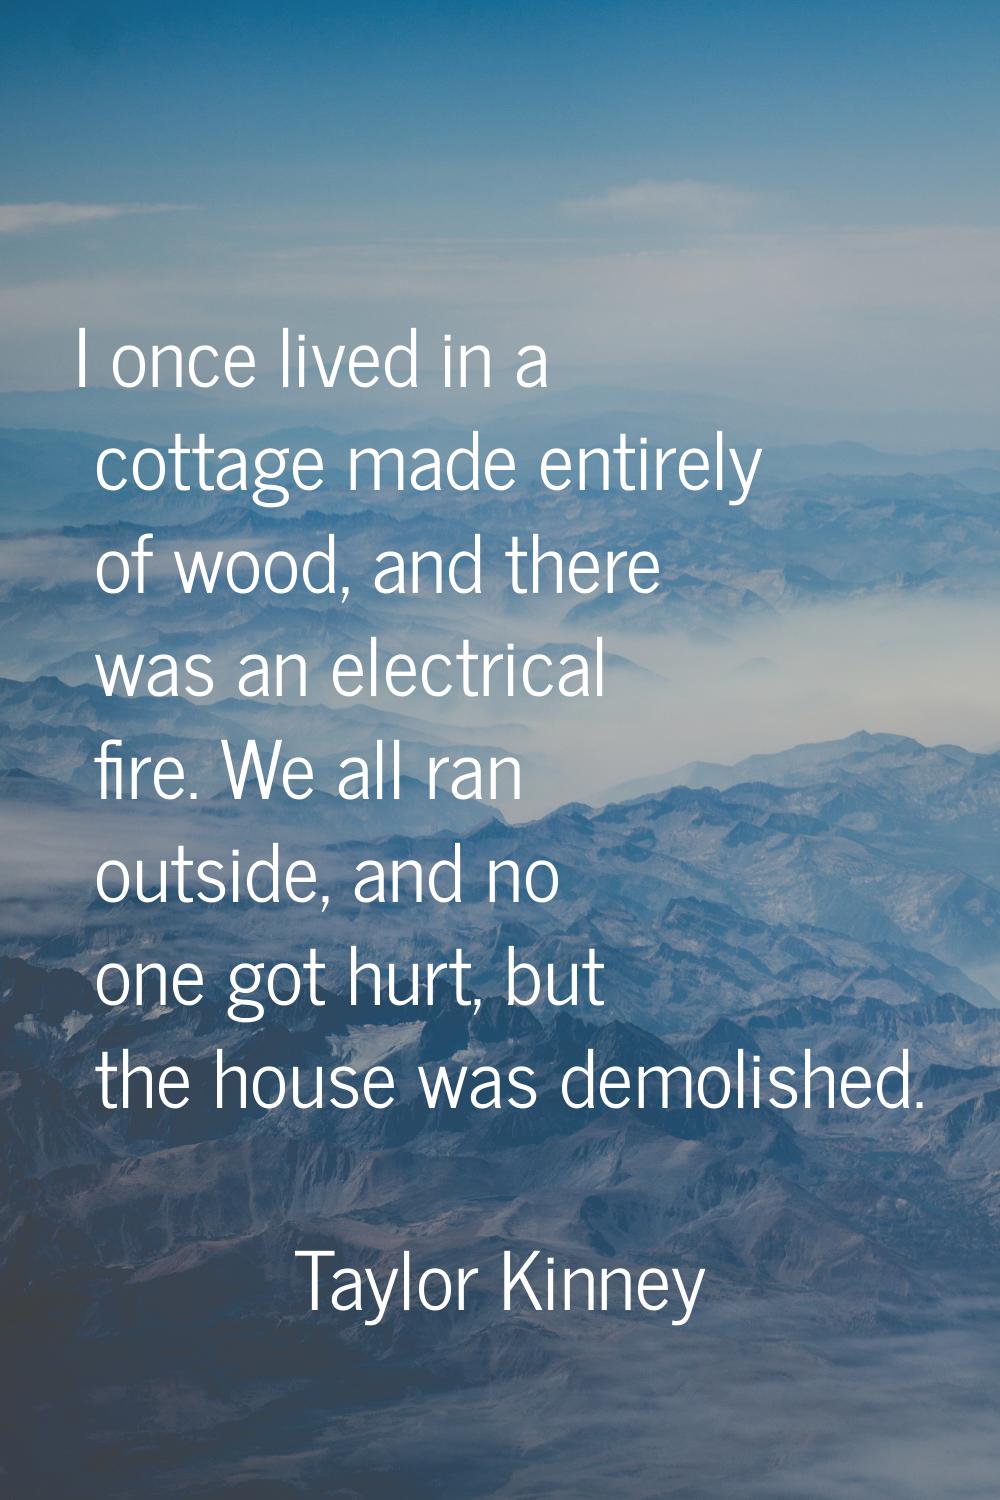 I once lived in a cottage made entirely of wood, and there was an electrical fire. We all ran outsi